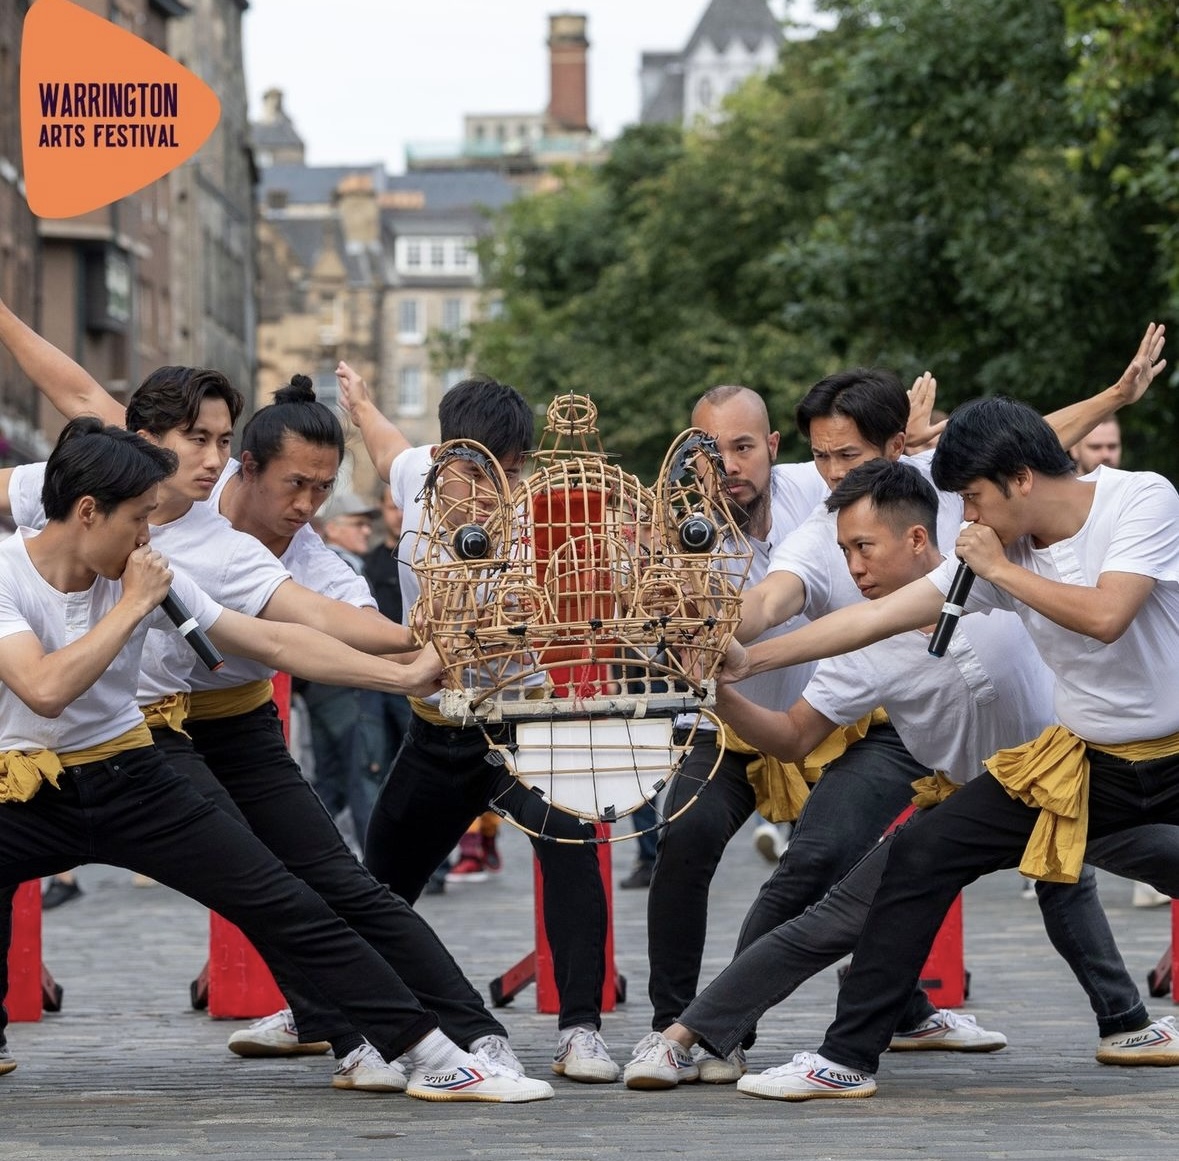 Step into the Acrobatic World of TS Crew’s Lion Dance Circus as part of Warrington Arts Festival